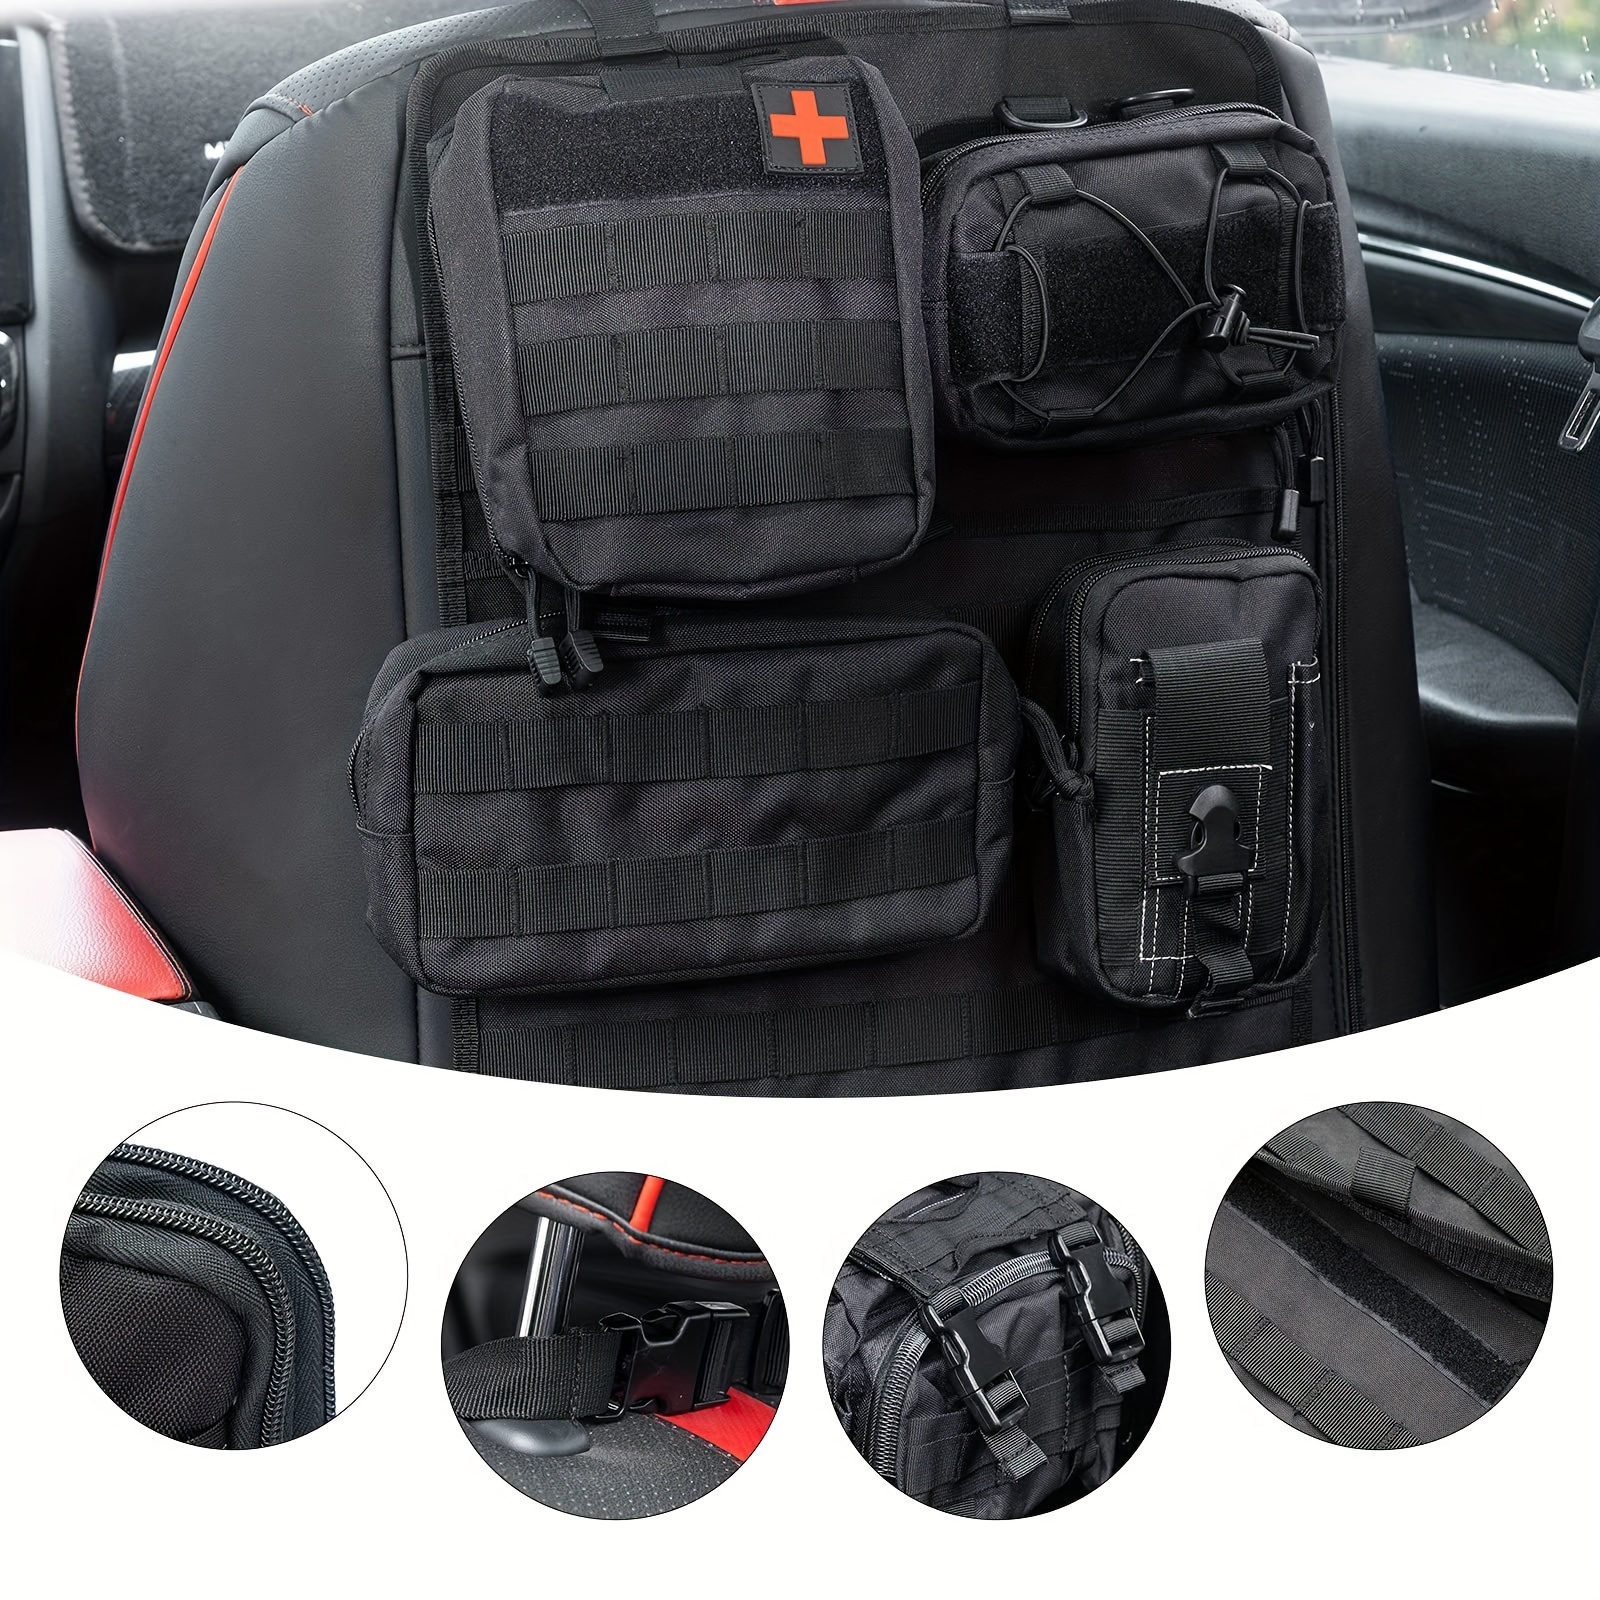 Universal Vehicle Seat Back Organizer With Detachable Molle Pouch, Phone Pouch, Admin Pouch Vehicle Panel Organizer Storage Bag With Multi-Pocket